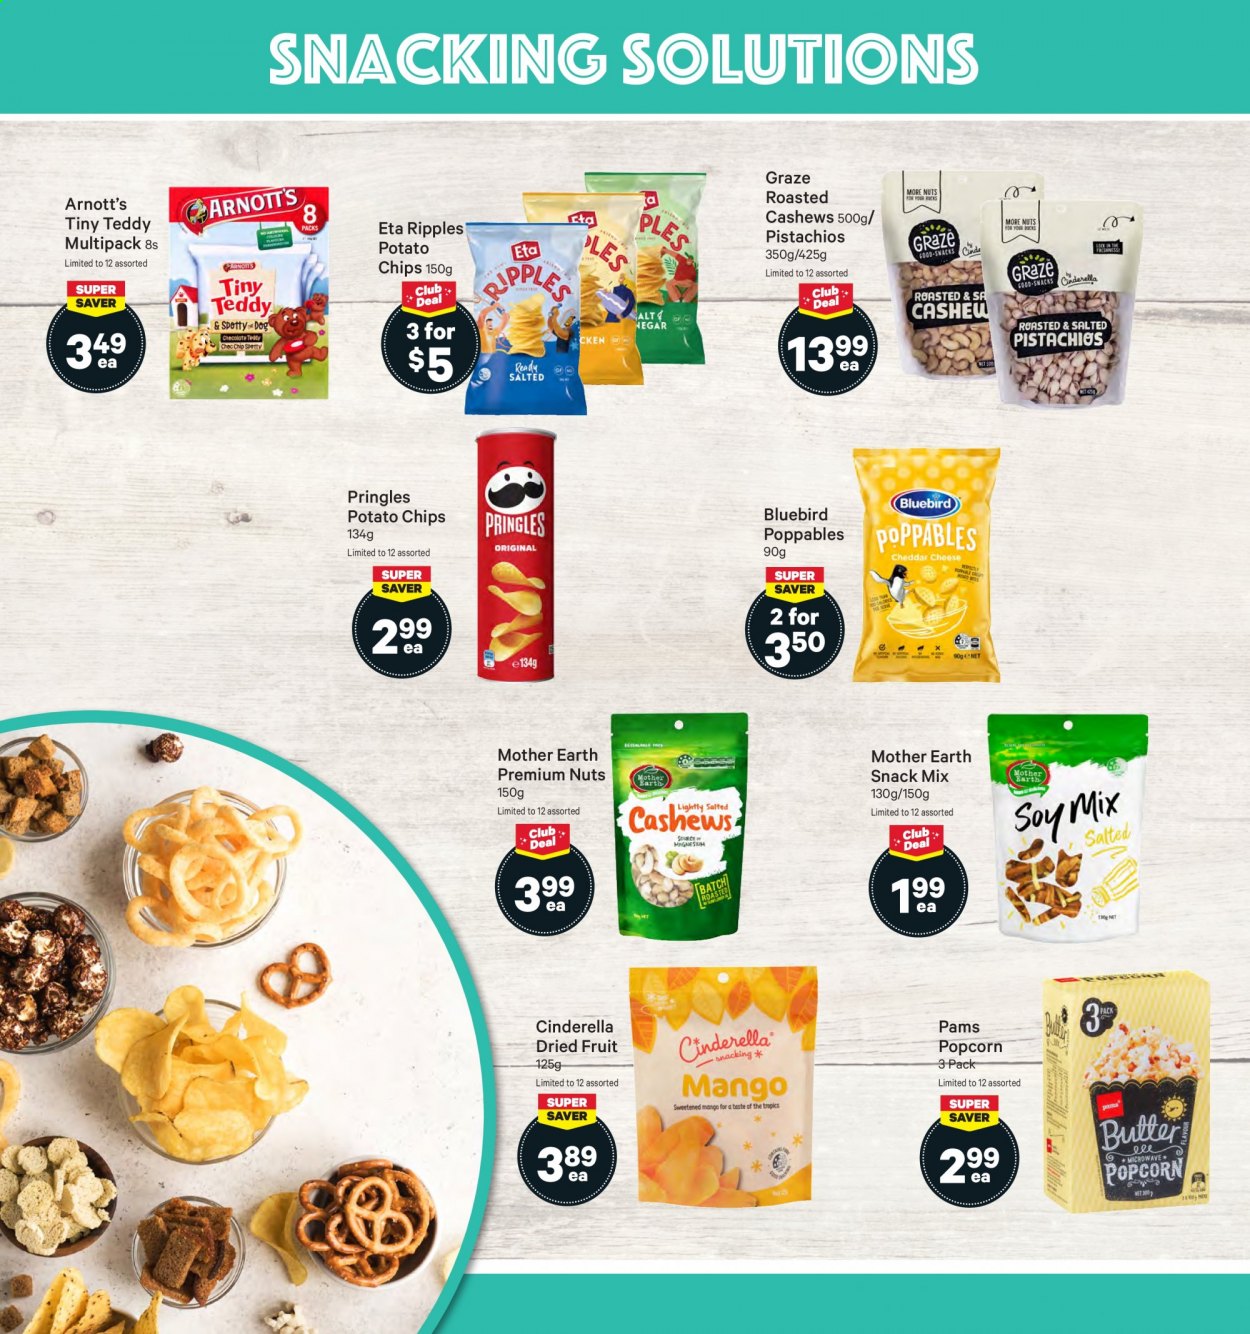 thumbnail - New World mailer - 26.07.2021 - 01.08.2021 - Sales products - mango, cheese, butter, snack, Mother Earth, potato chips, Pringles, chips, Soy Mix, Bluebird, popcorn, cashews, dried fruit, pistachios, Graze. Page 14.